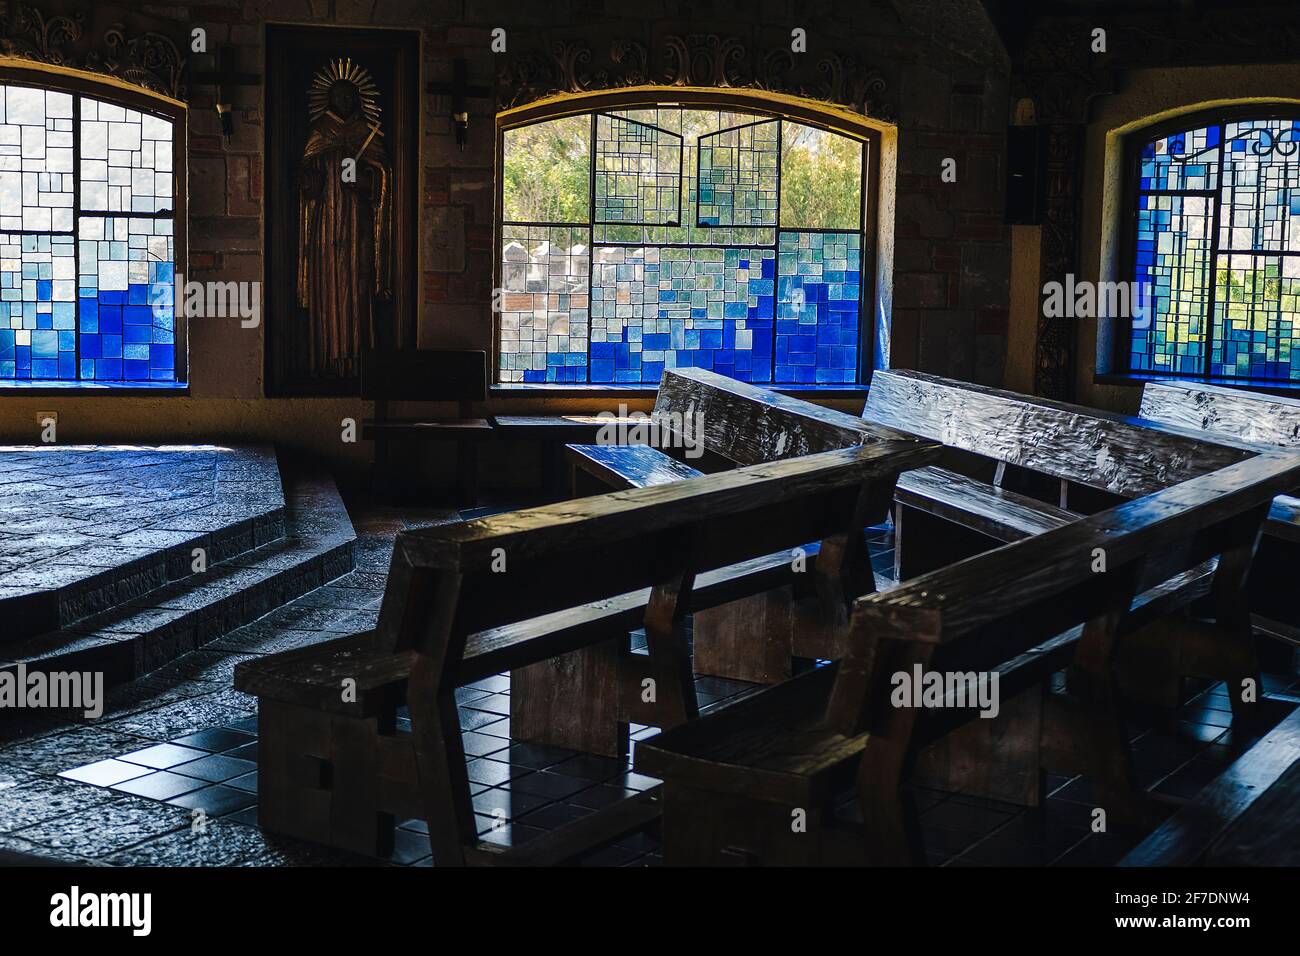 Mexico, Valle de Bravo March 26, 2021, view of the maera benches and a stained glass window in the background inside the chapel of the 'Casa De Oració Stock Photo